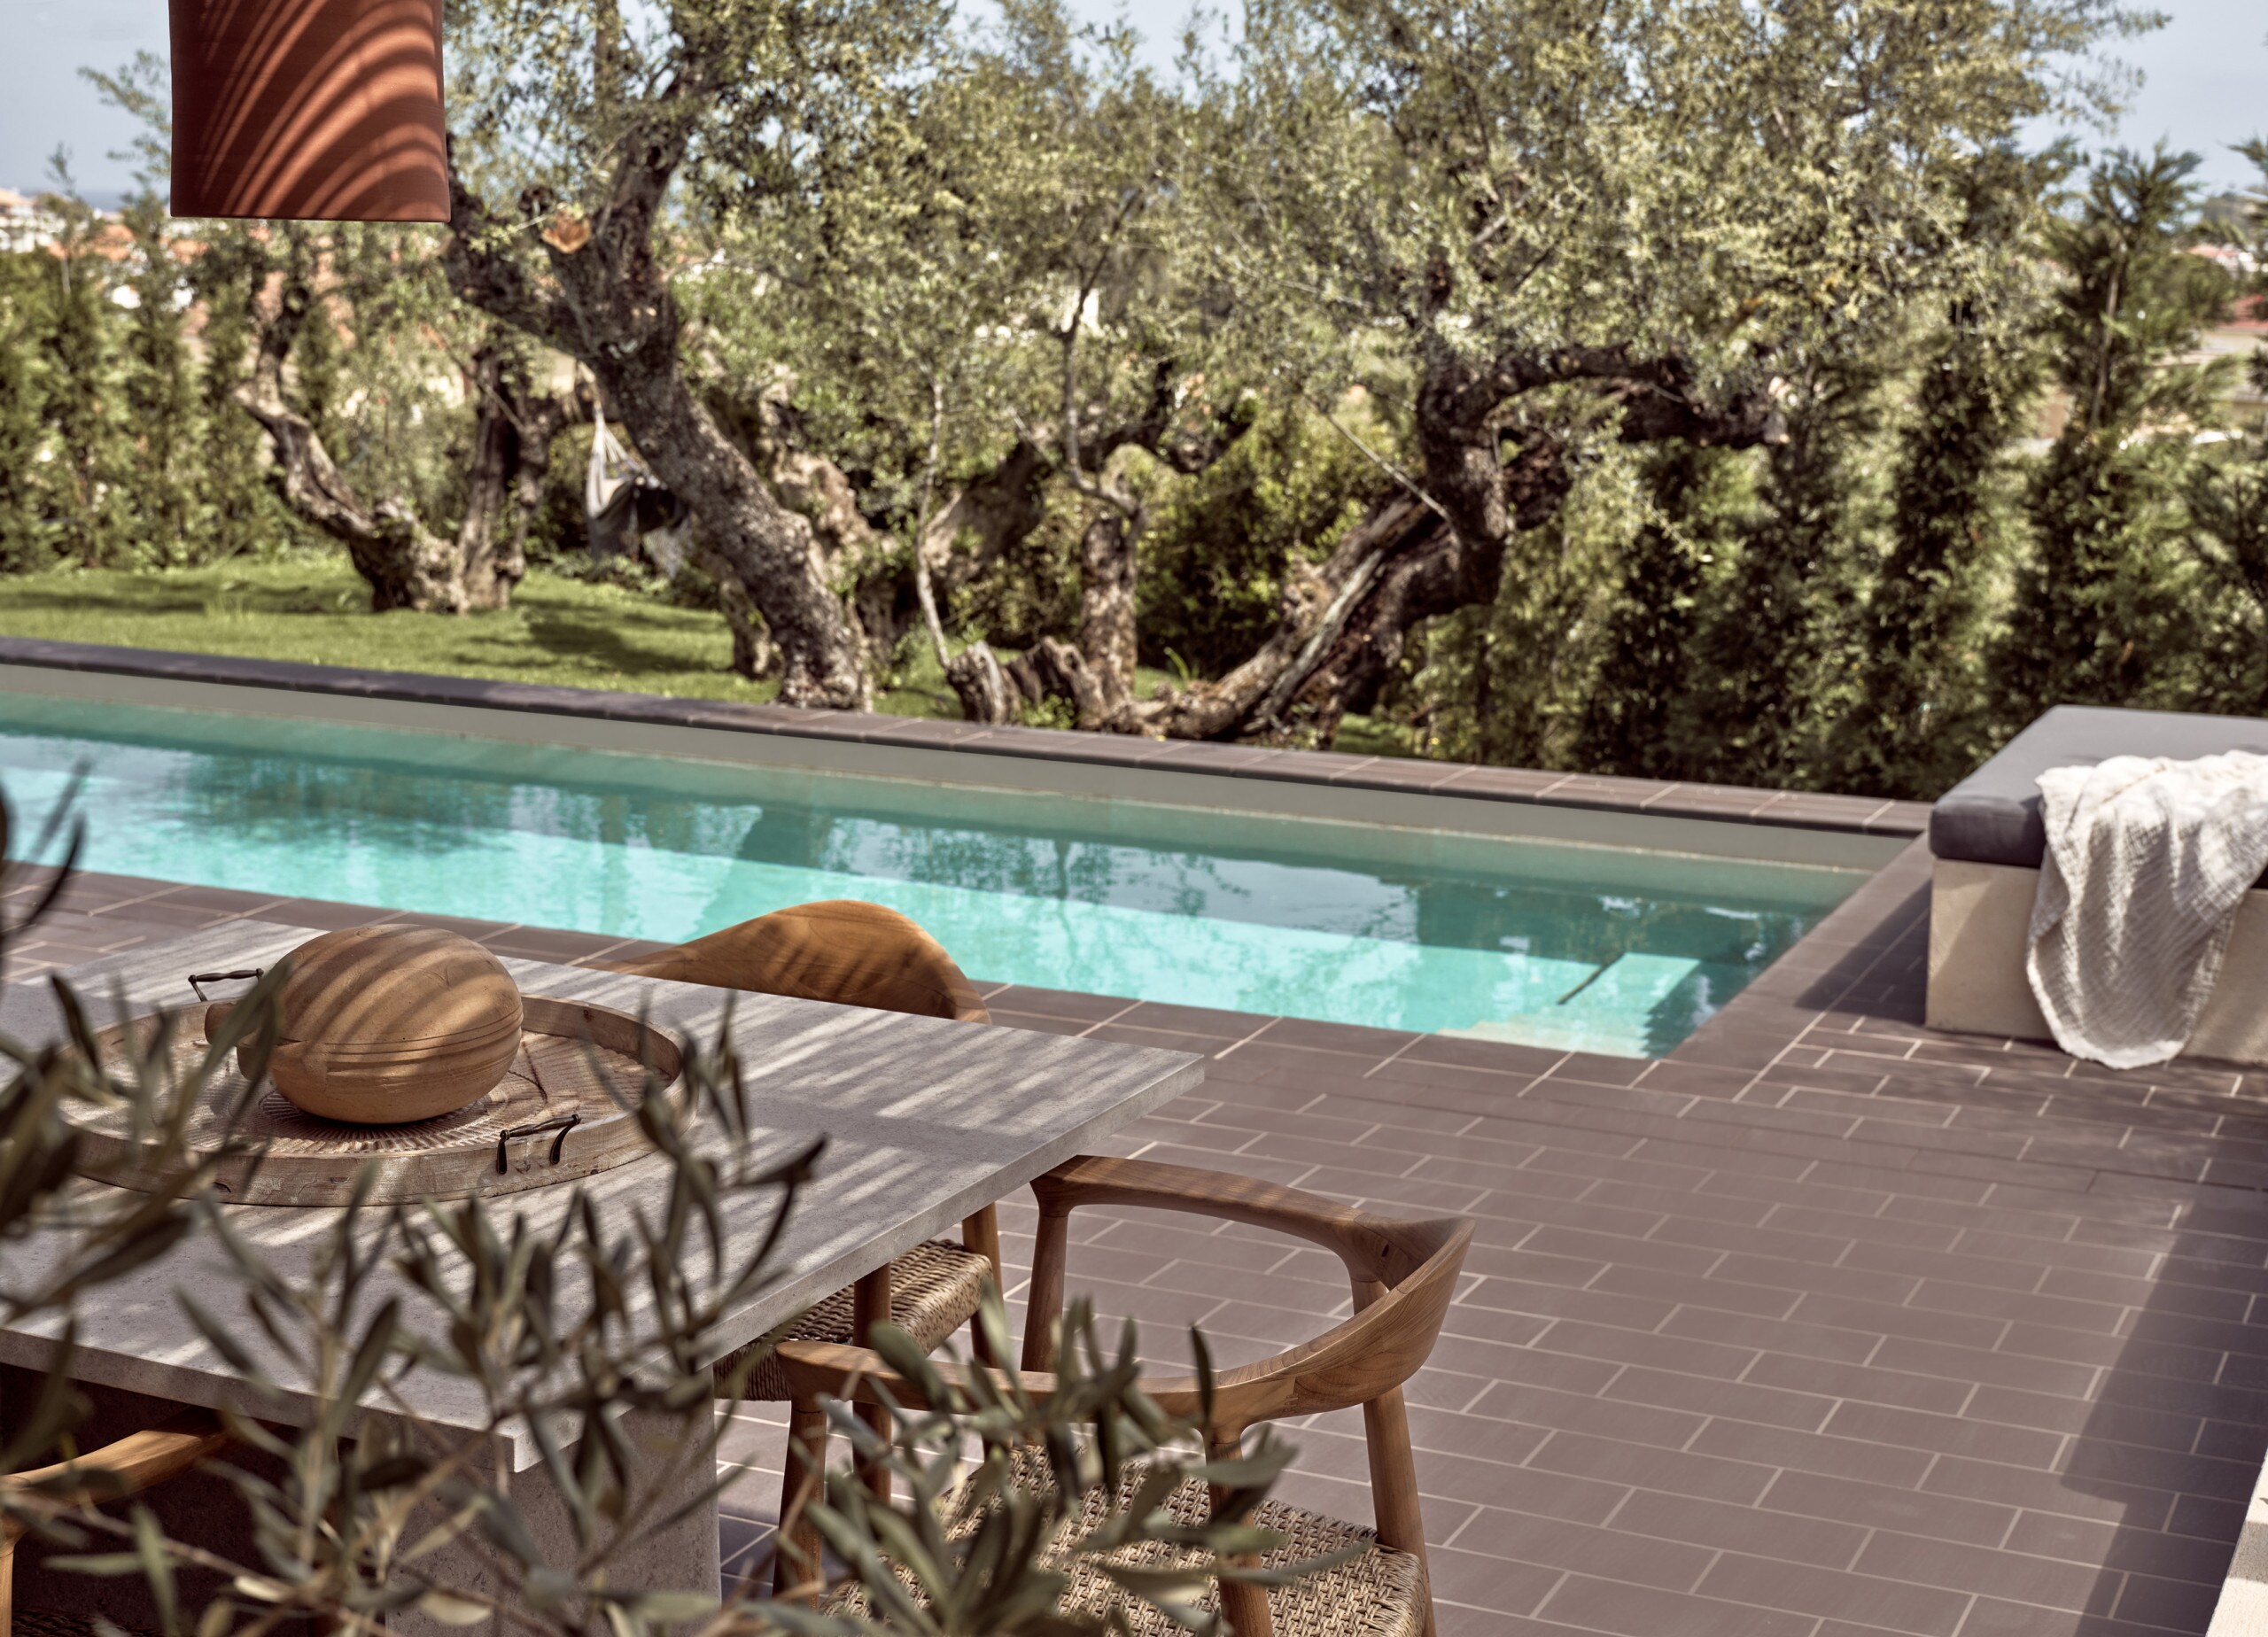 Featuring a 30m2 Private Pool with captivating natural surroundings